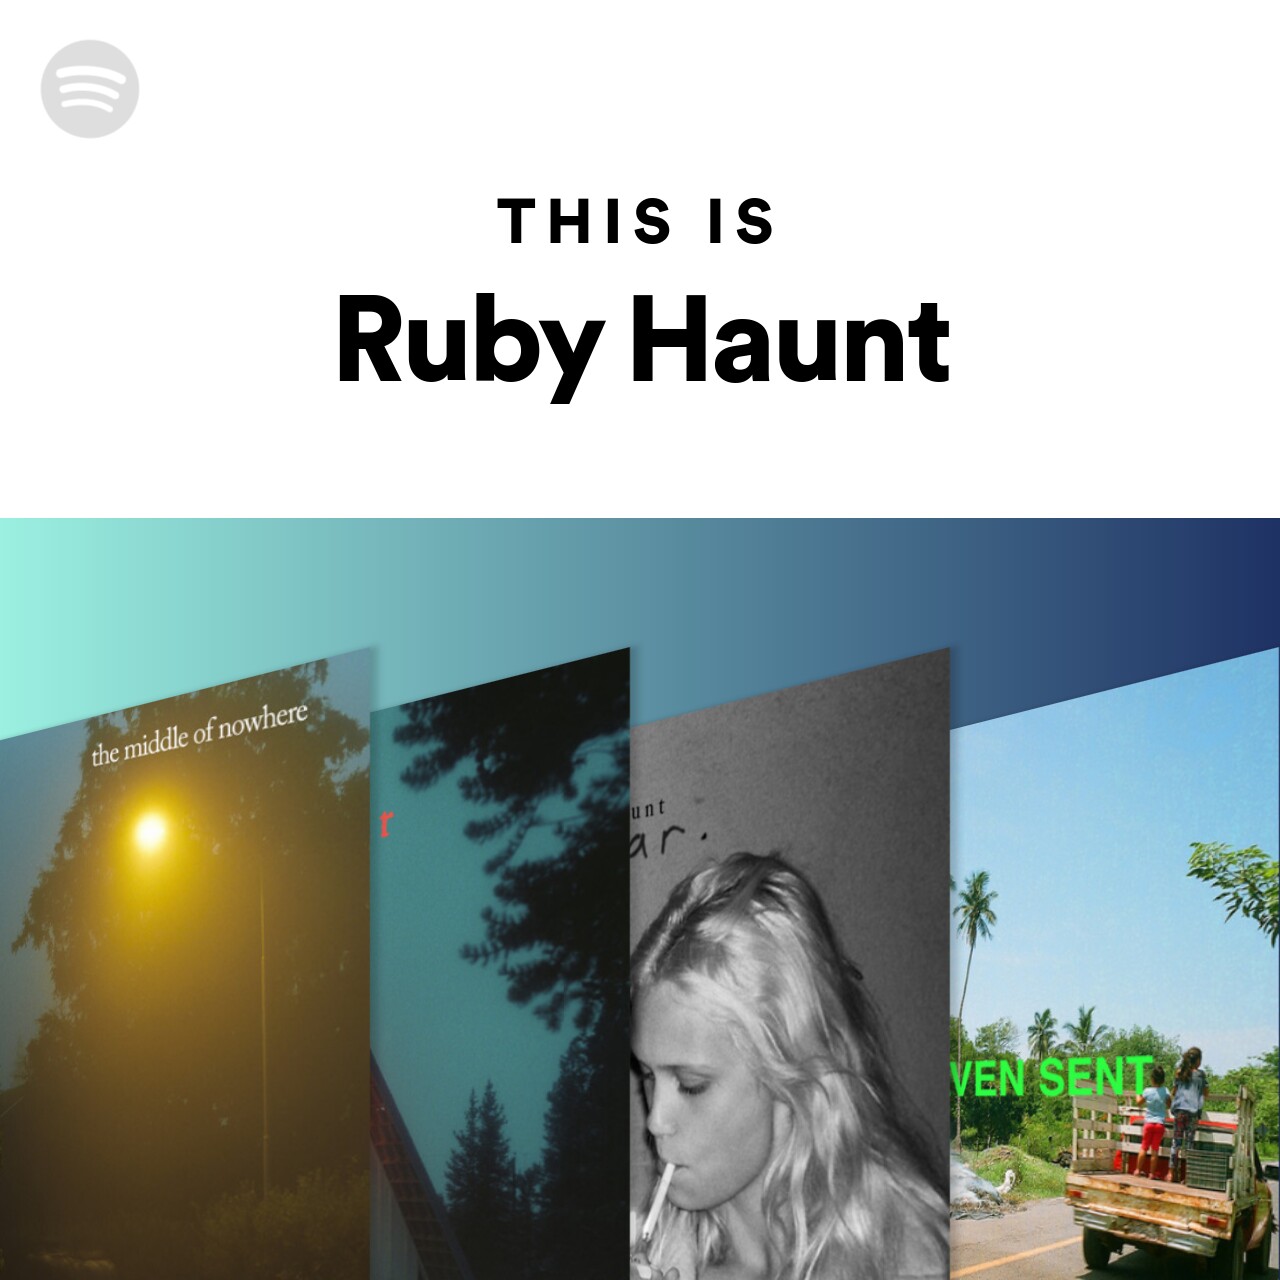 This Is Ruby Haunt